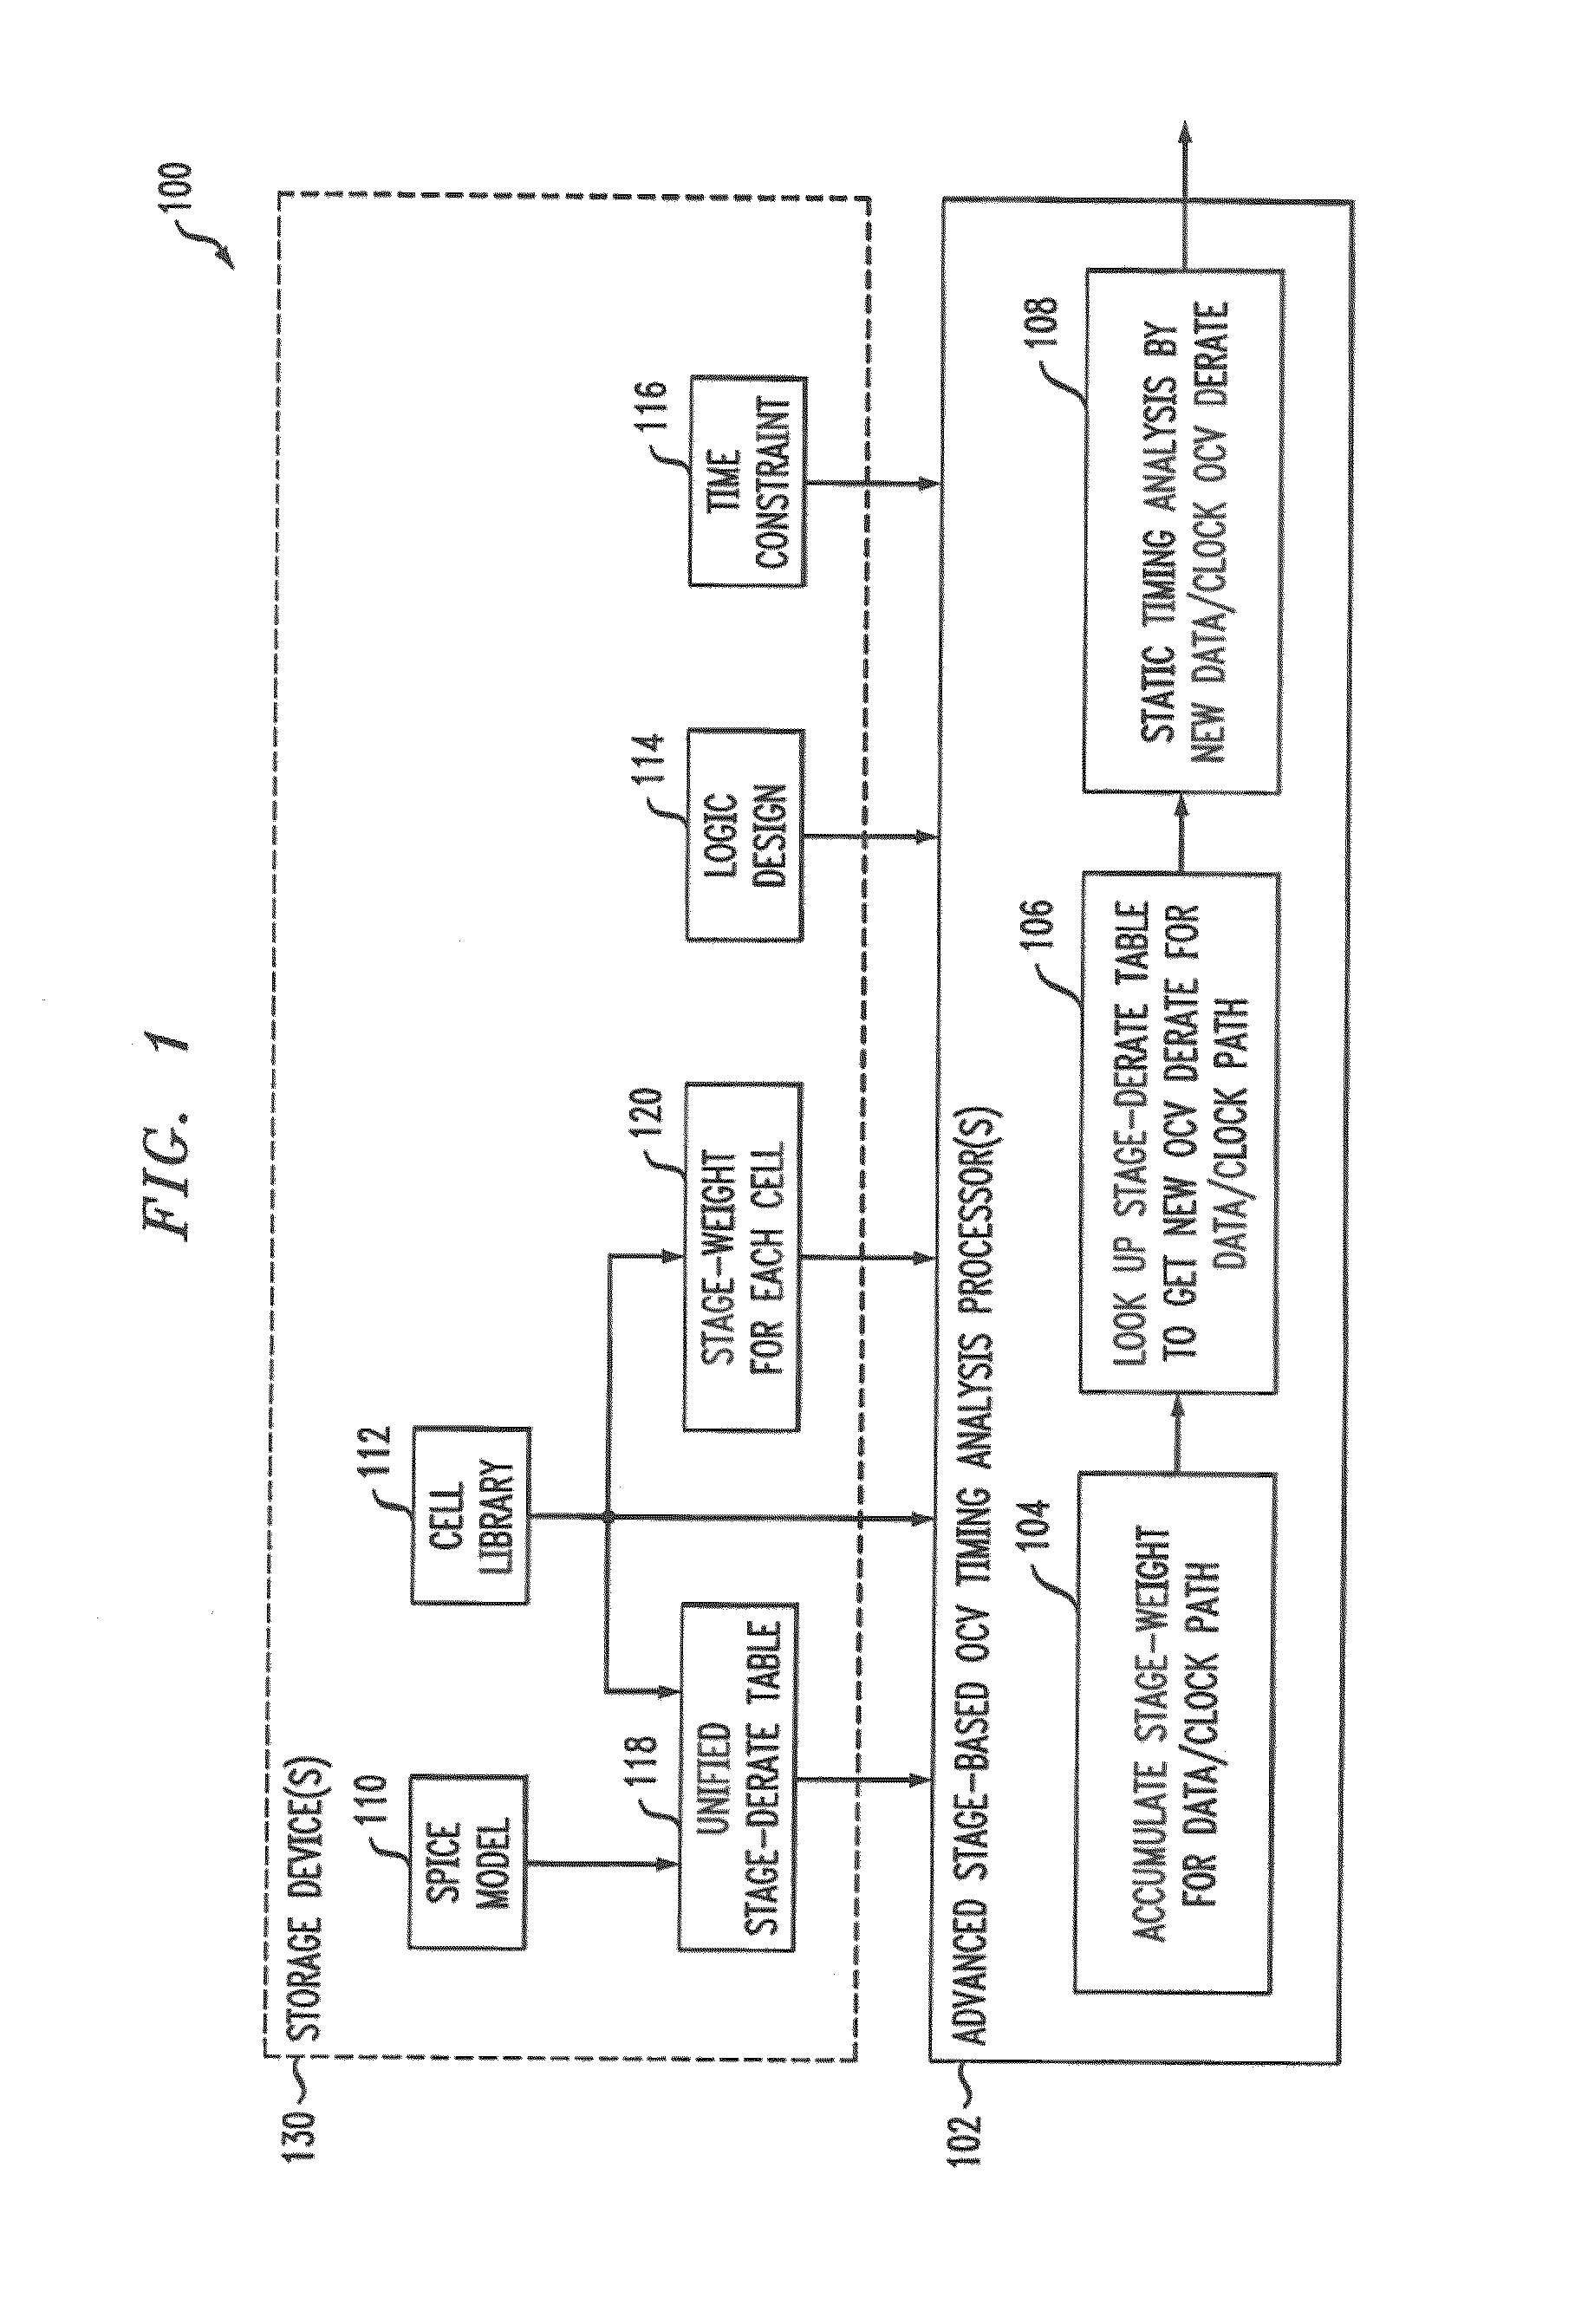 System and method for on-chip-variation analysis